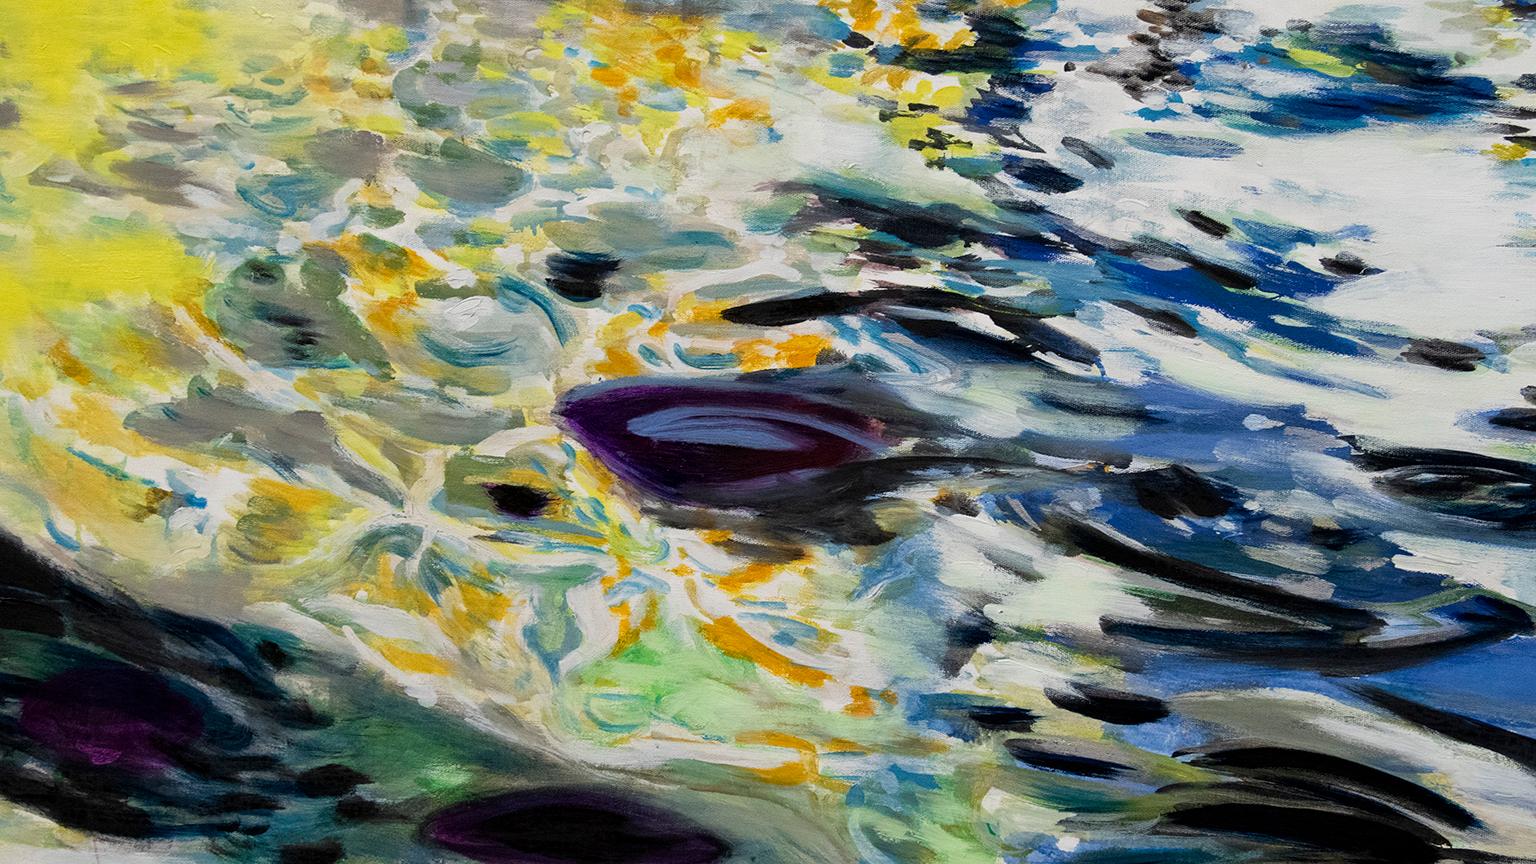 Rome, Watery Reflection 57 X 54 - Painting by Antonio Ugarte